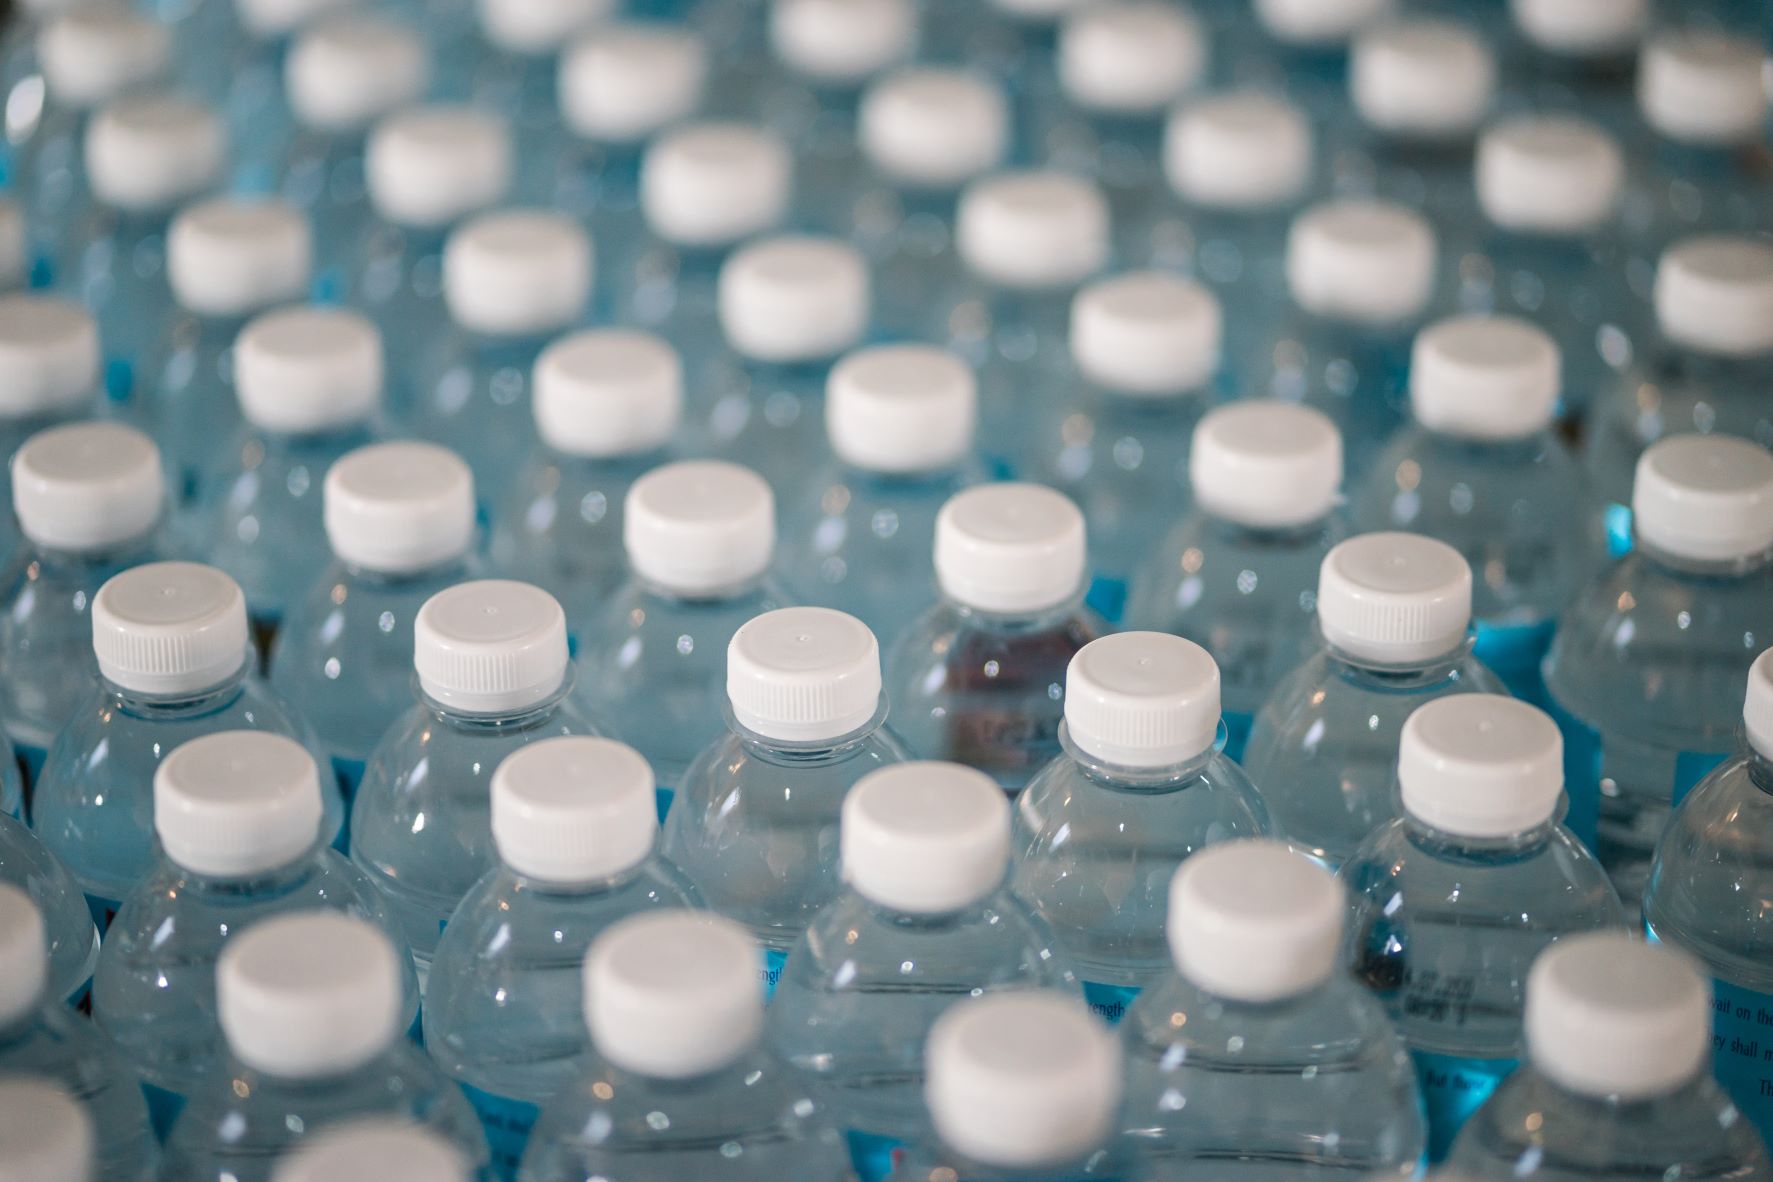 Marketplace Reacts to Coke’s Moves to Put More PET in Bottle-to-Bottle Recycling